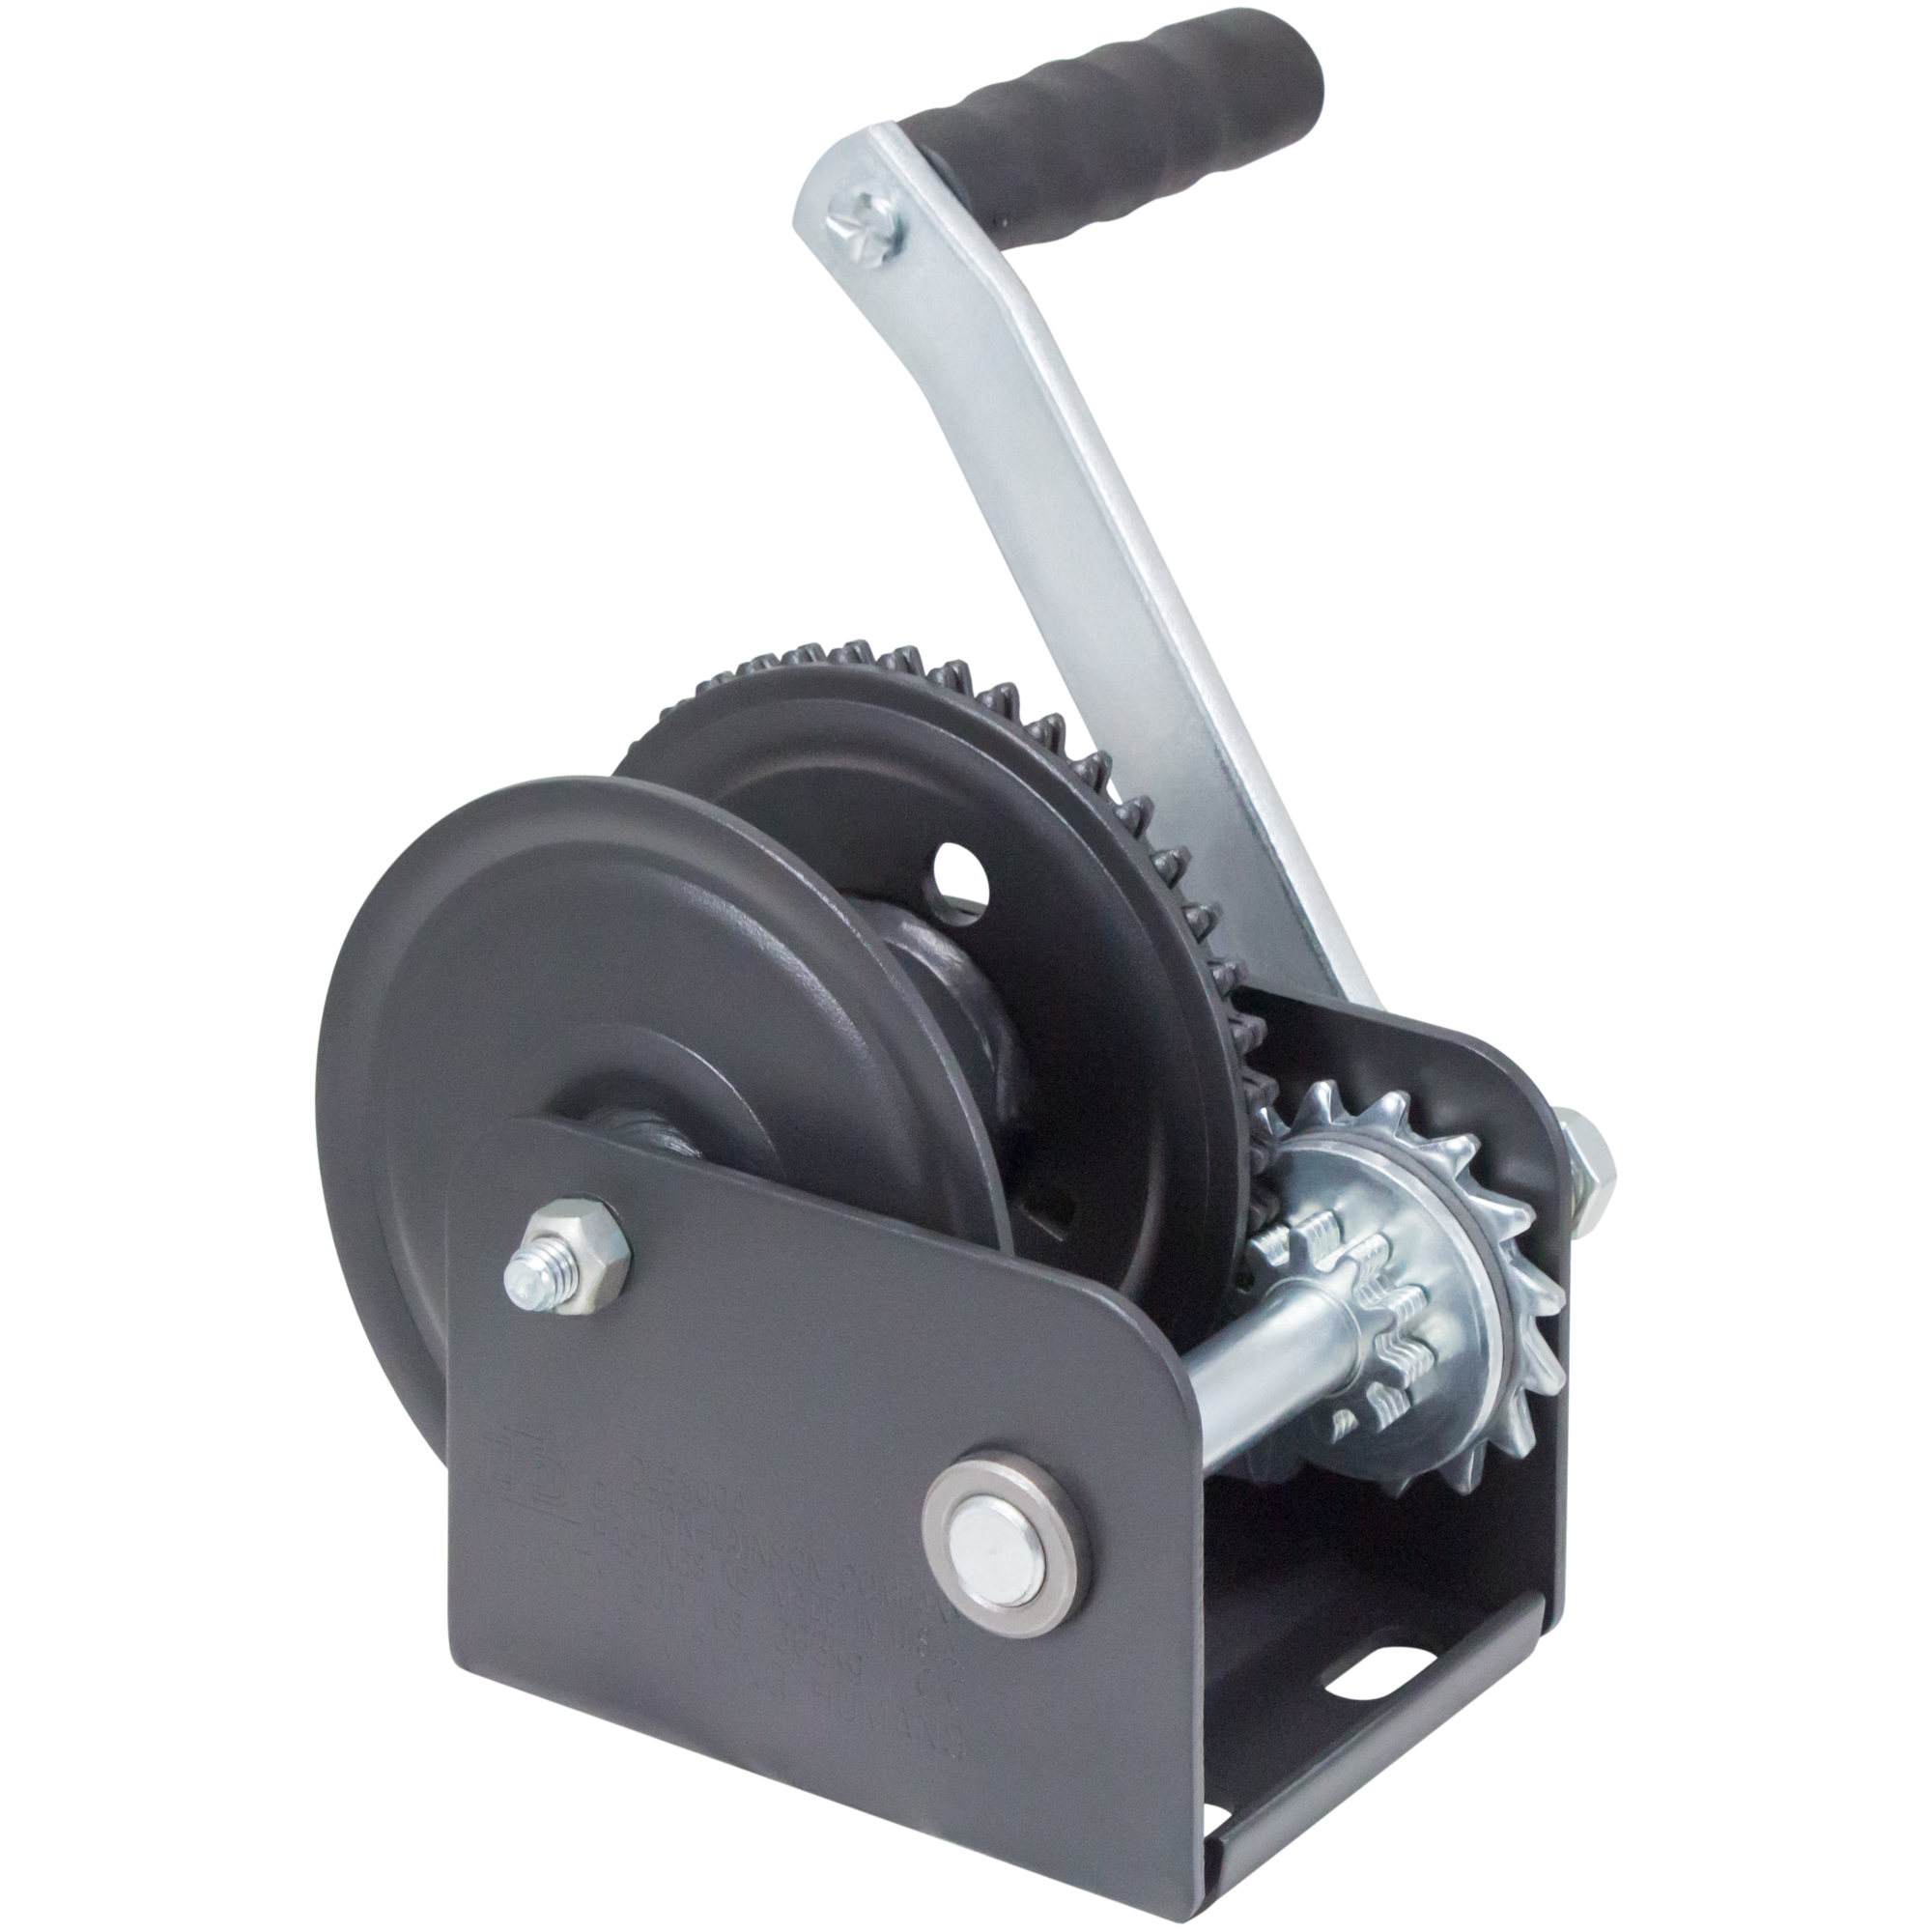 Dutton-Lainson Single Speed Hand Winch with Automatic Brake, 800-Lb. Capacity, Vertical Lifting, Model DLB800